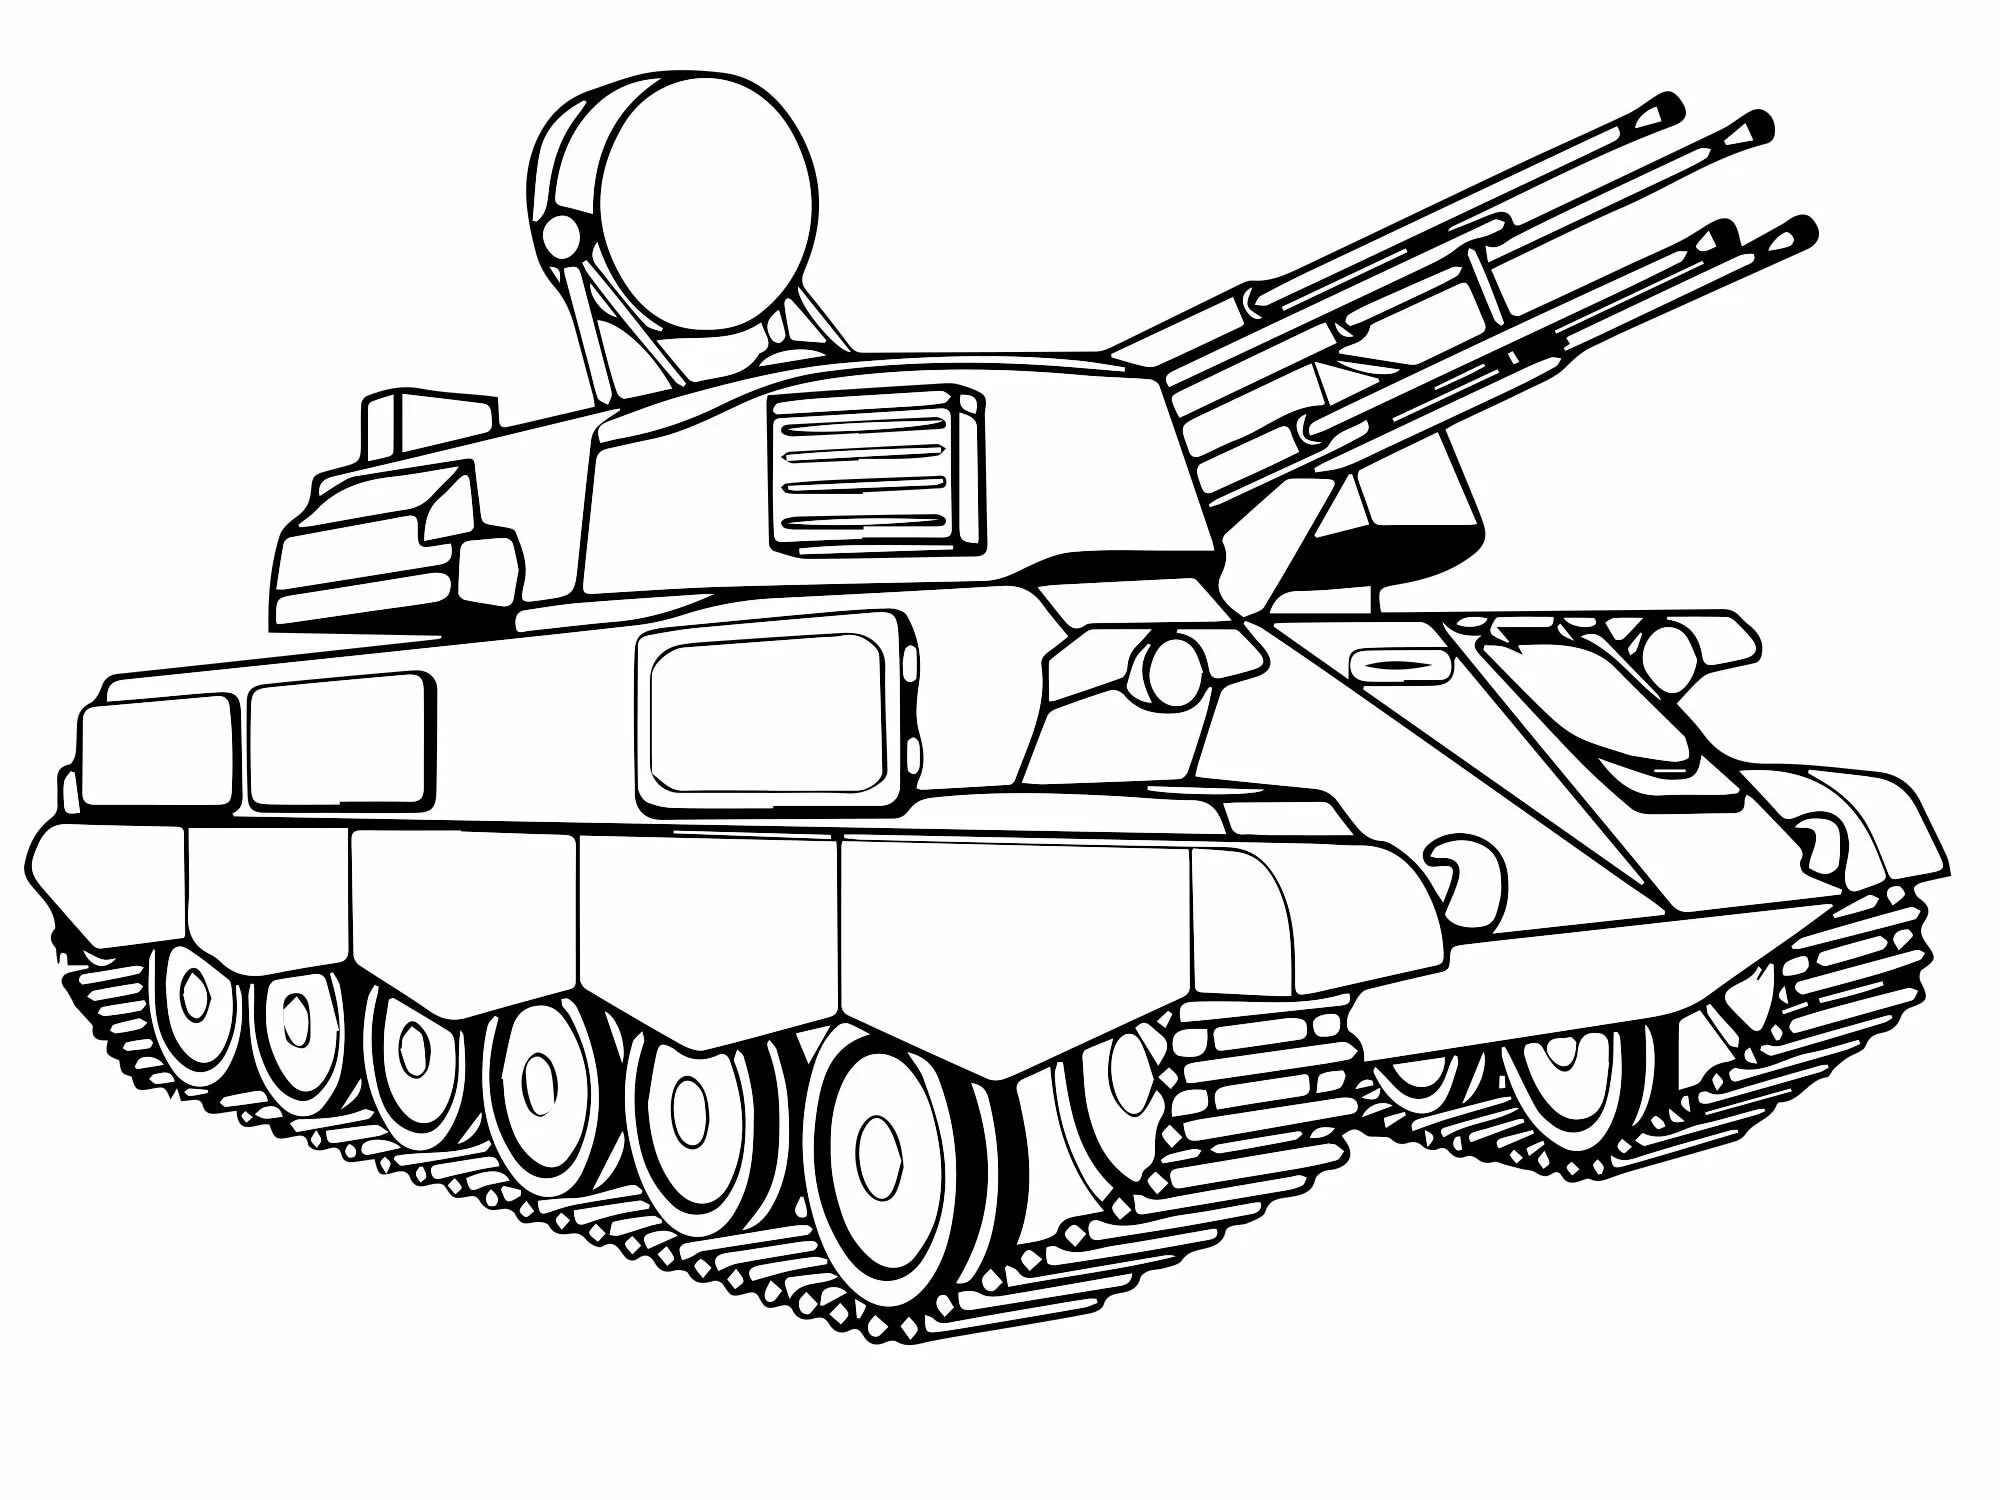 Coloring tank for children 4-5 years old